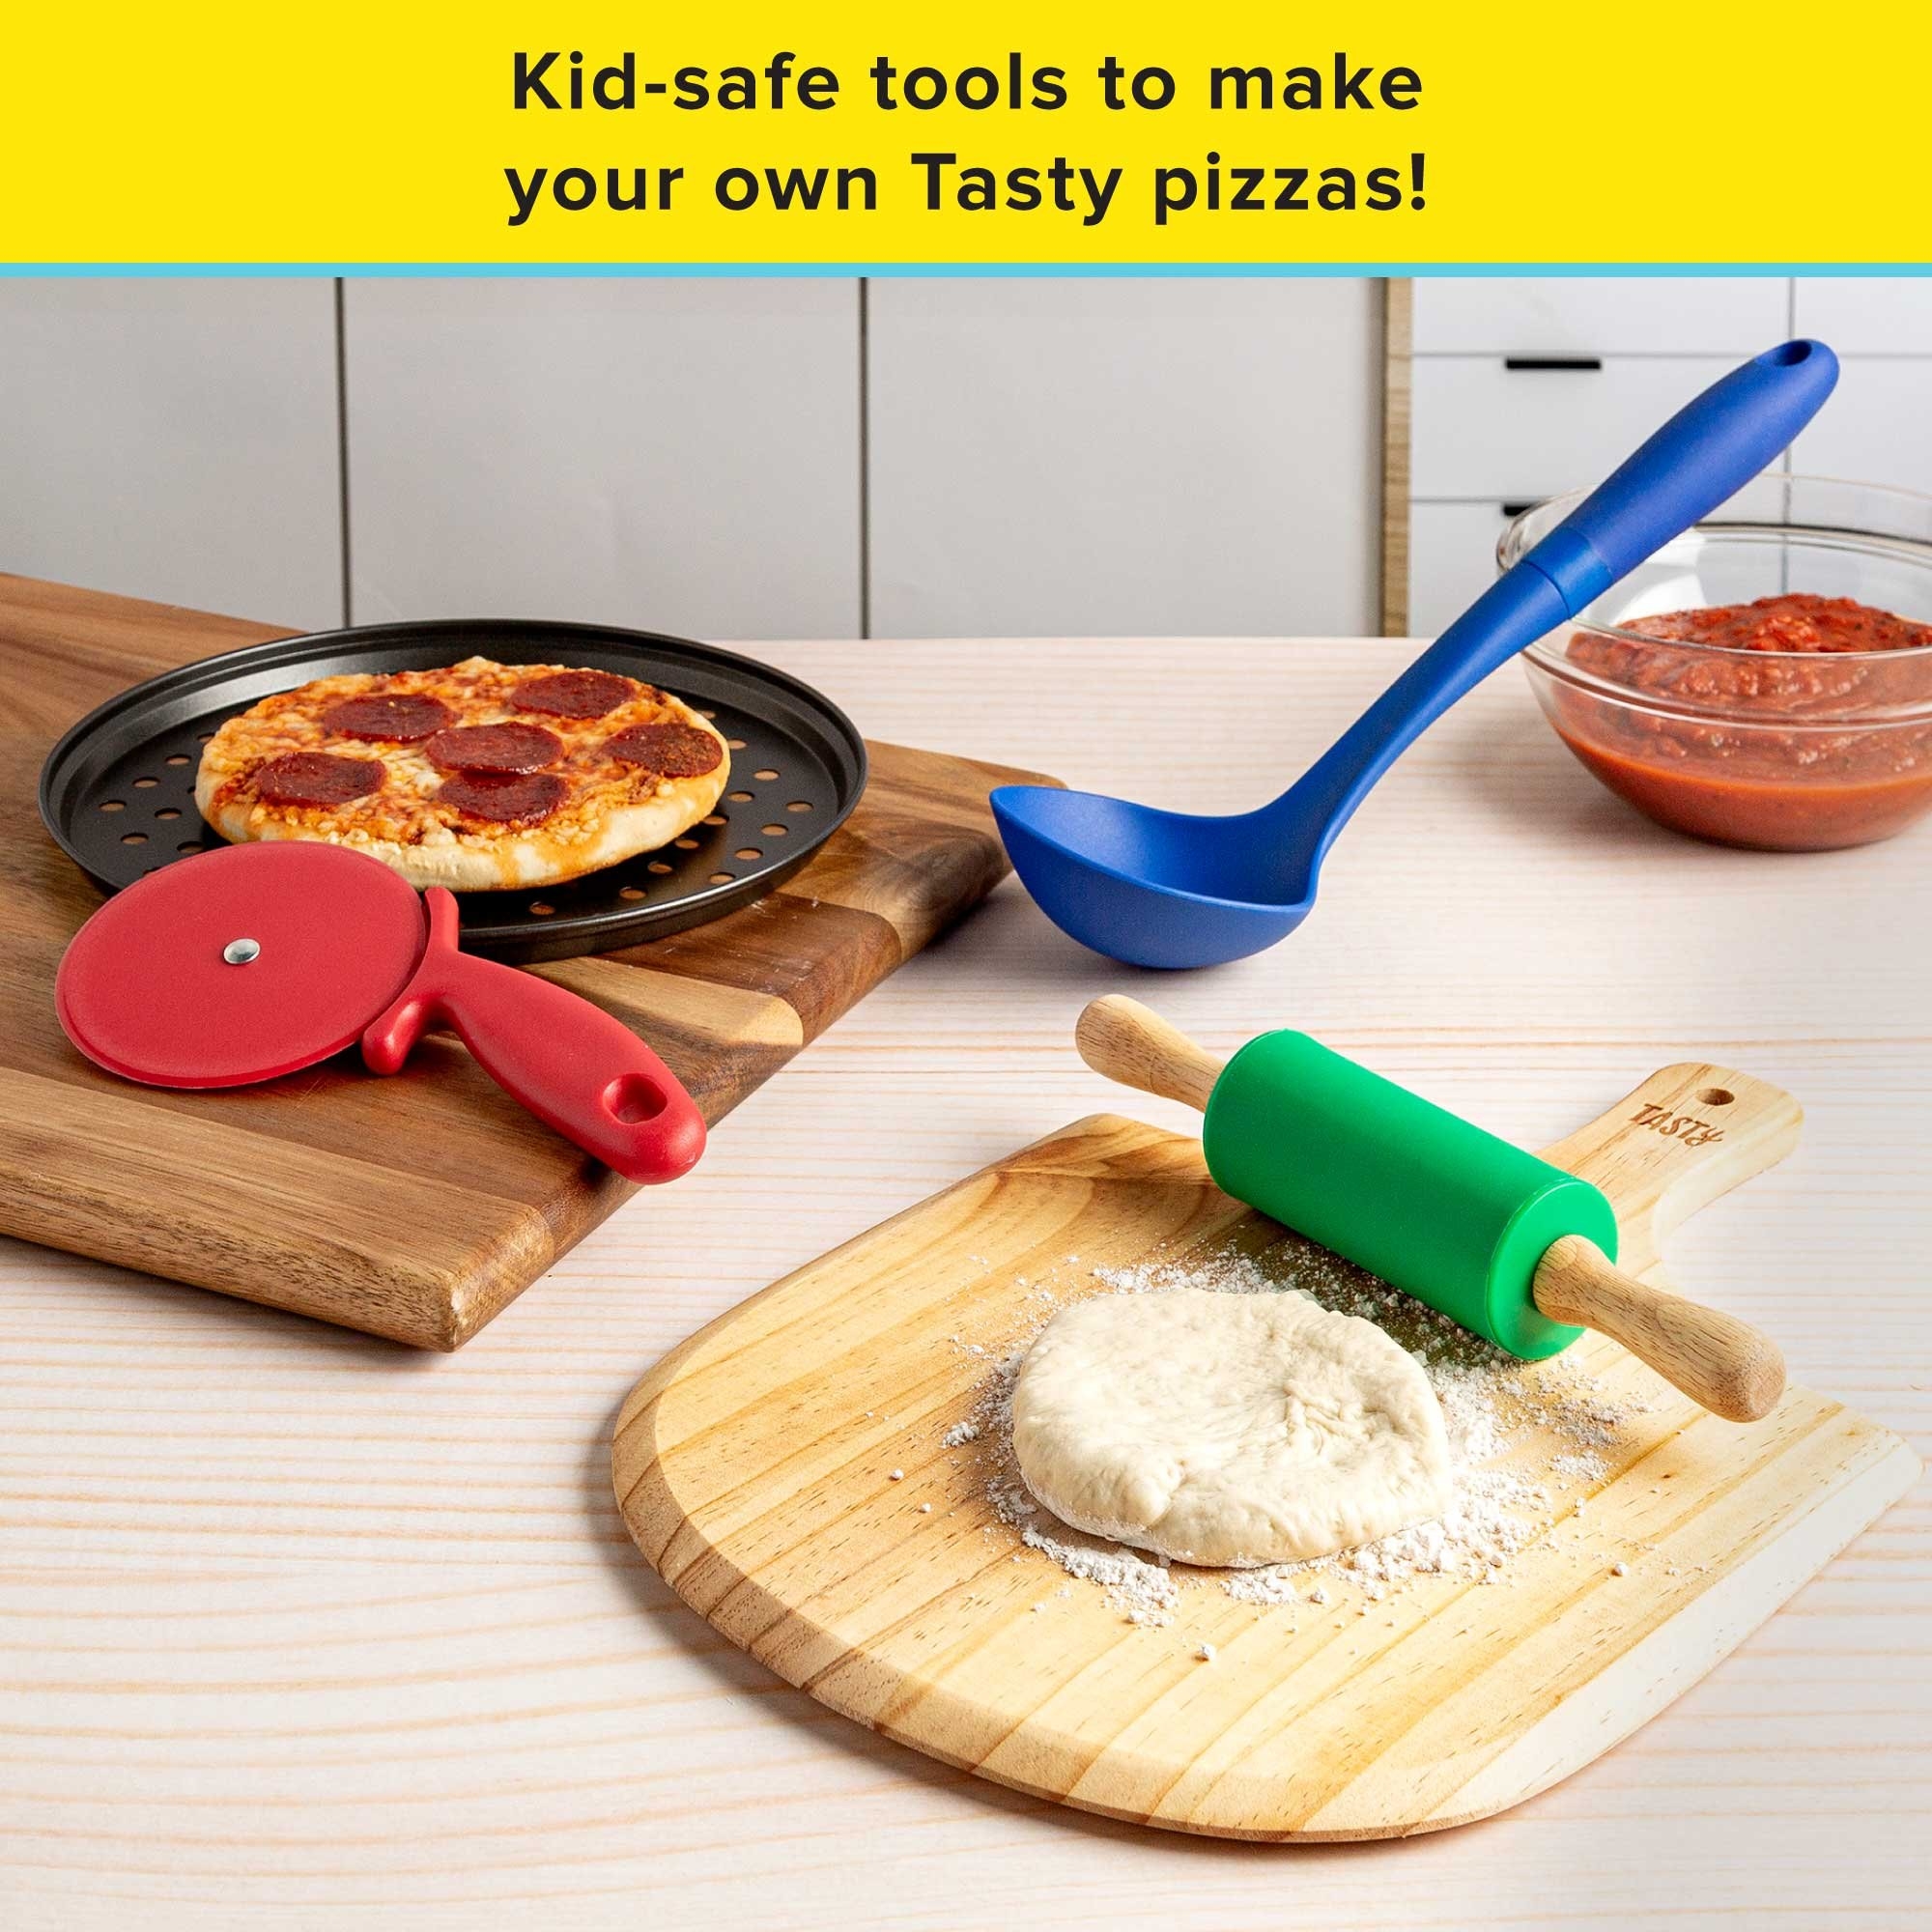 pizza pan next to red pizza cutter, green roller on serving board with dough, blue ladle next to bowl of sauce